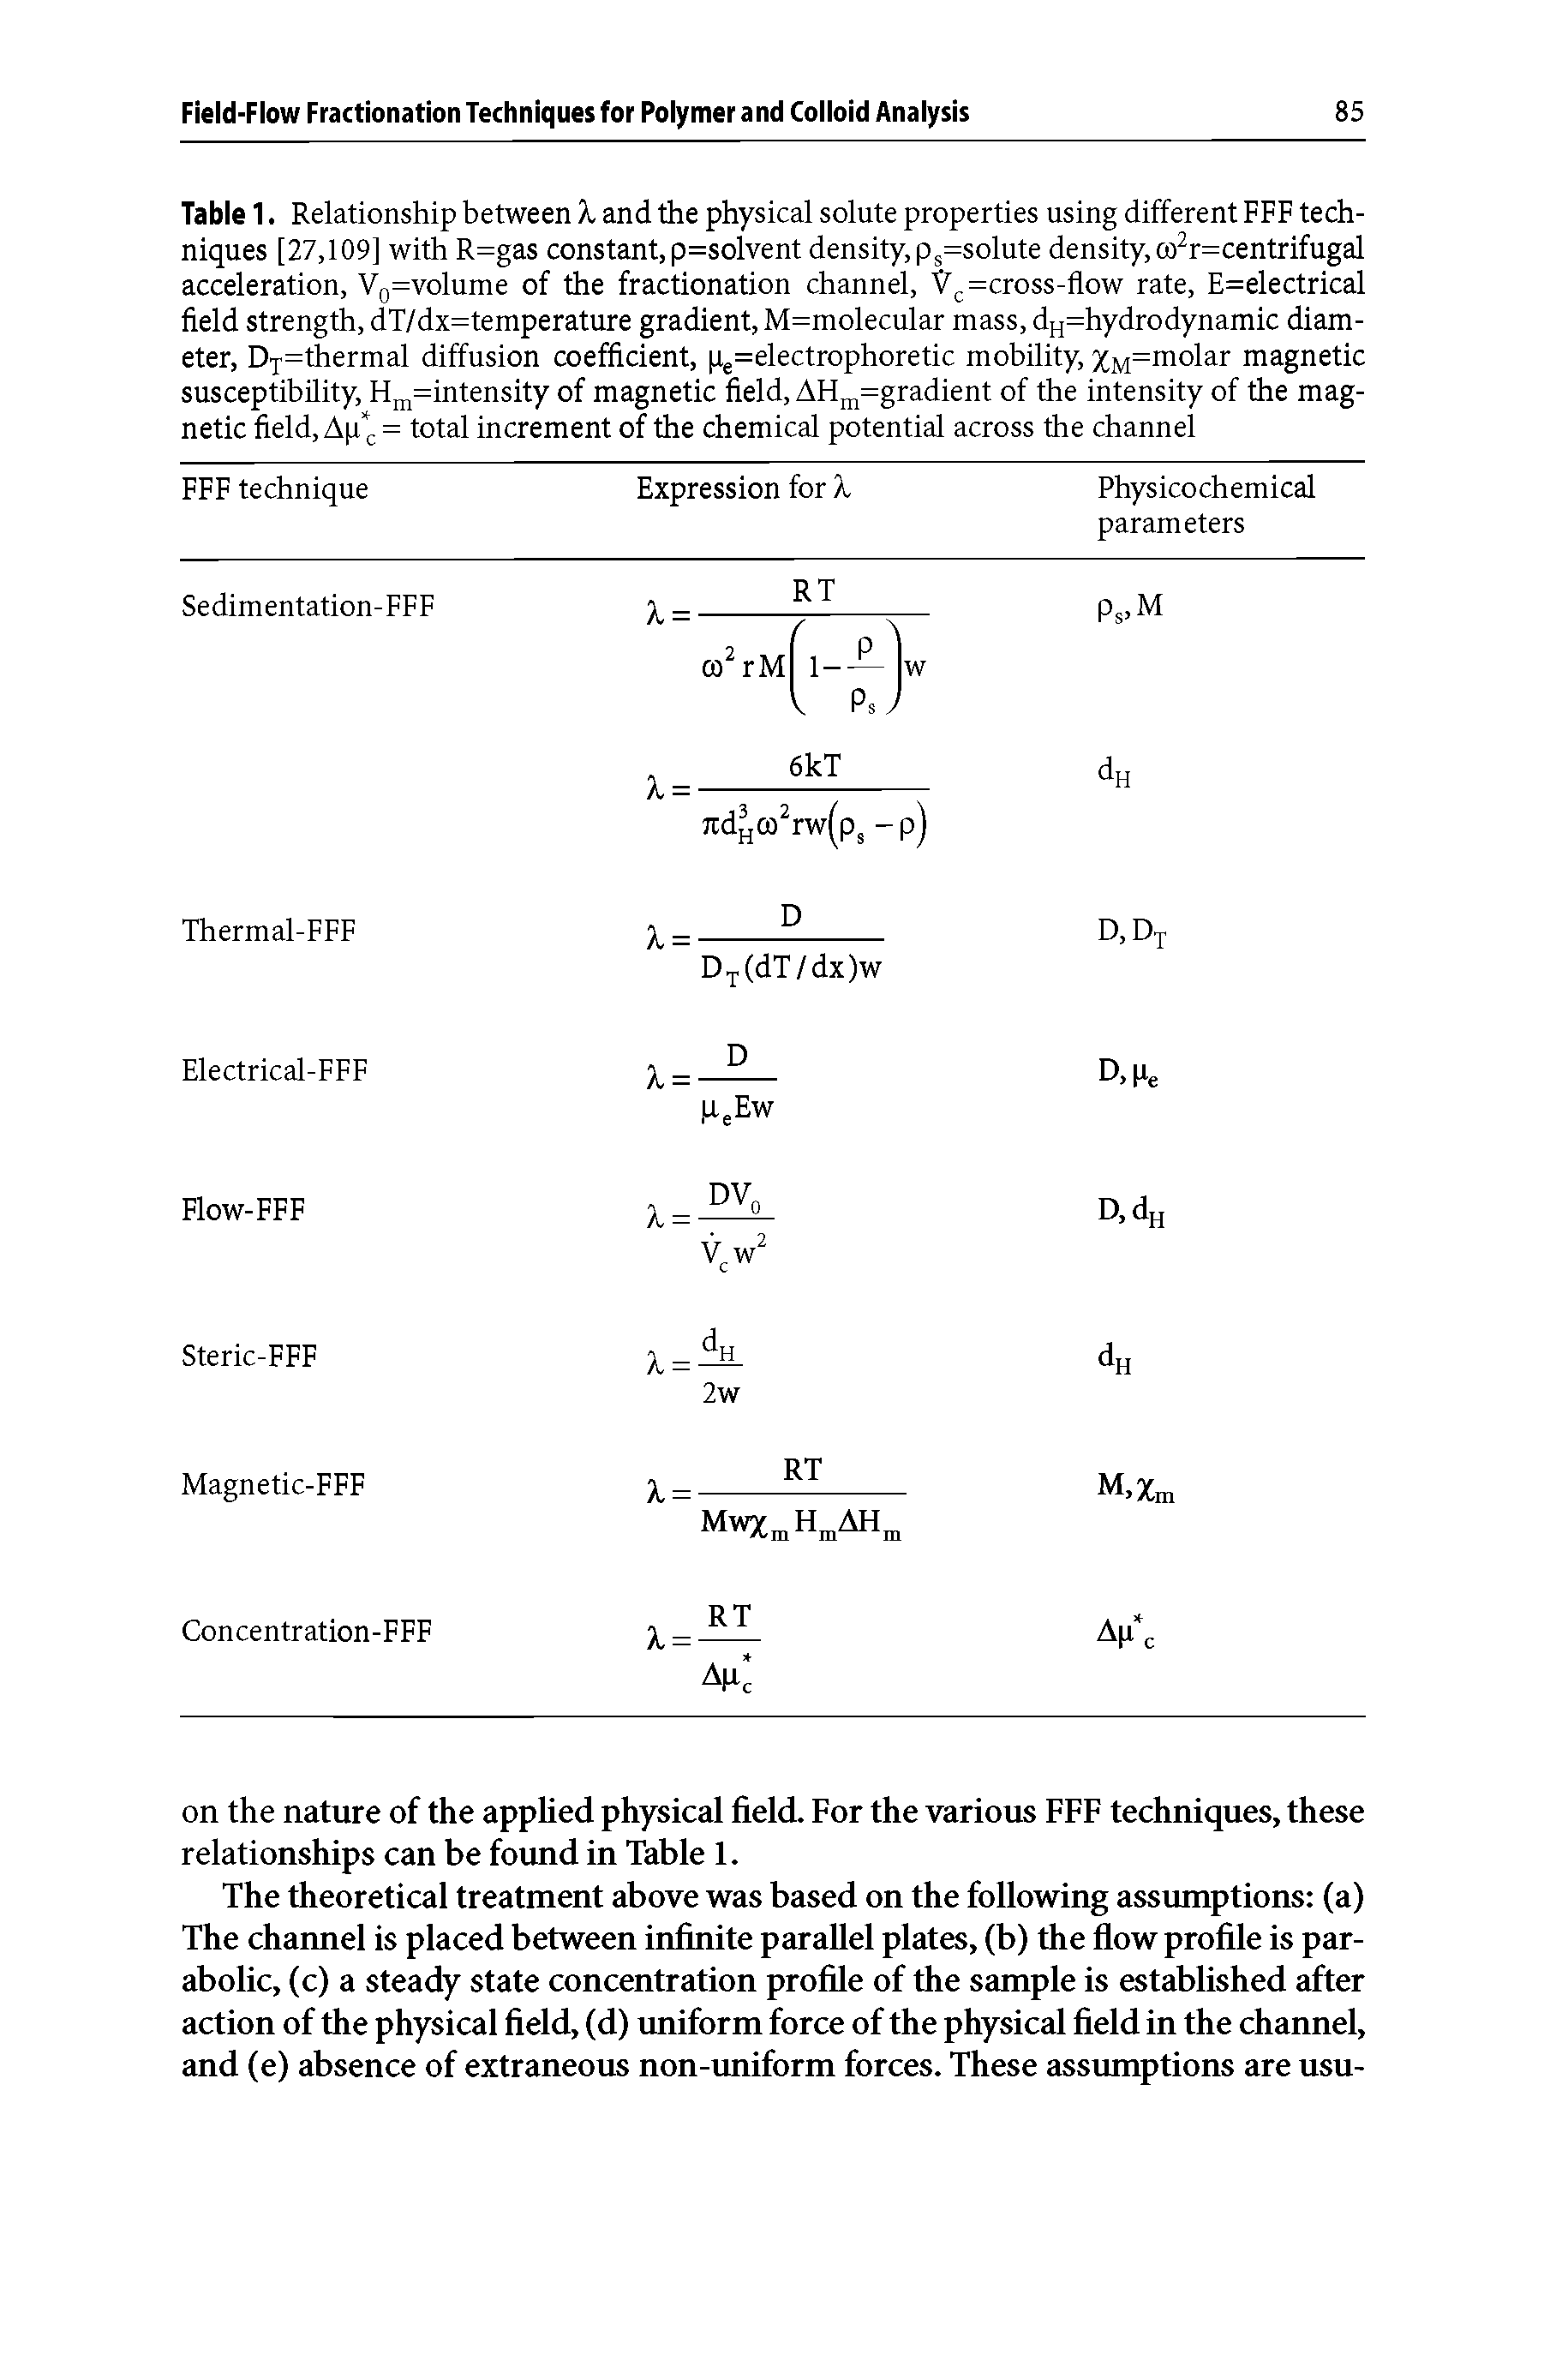 Table 1. Relationship between X and the physical solute properties using different FFF techniques [27,109] with R=gas constant, p=solvent density, ps=solute density, co2r=centrifugal acceleration, V0=volume of the fractionation channel, Vc=cross-flow rate, E=electrical field strength, dT/dx=temperature gradient, M=molecular mass, dH=hydrodynamic diameter, DT=thermal diffusion coefficient, pe=electrophoretic mobility, %M=molar magnetic susceptibility, Hm=intensity of magnetic field, AHm=gradient of the intensity of the magnetic field, Ap = total increment of the chemical potential across the channel...